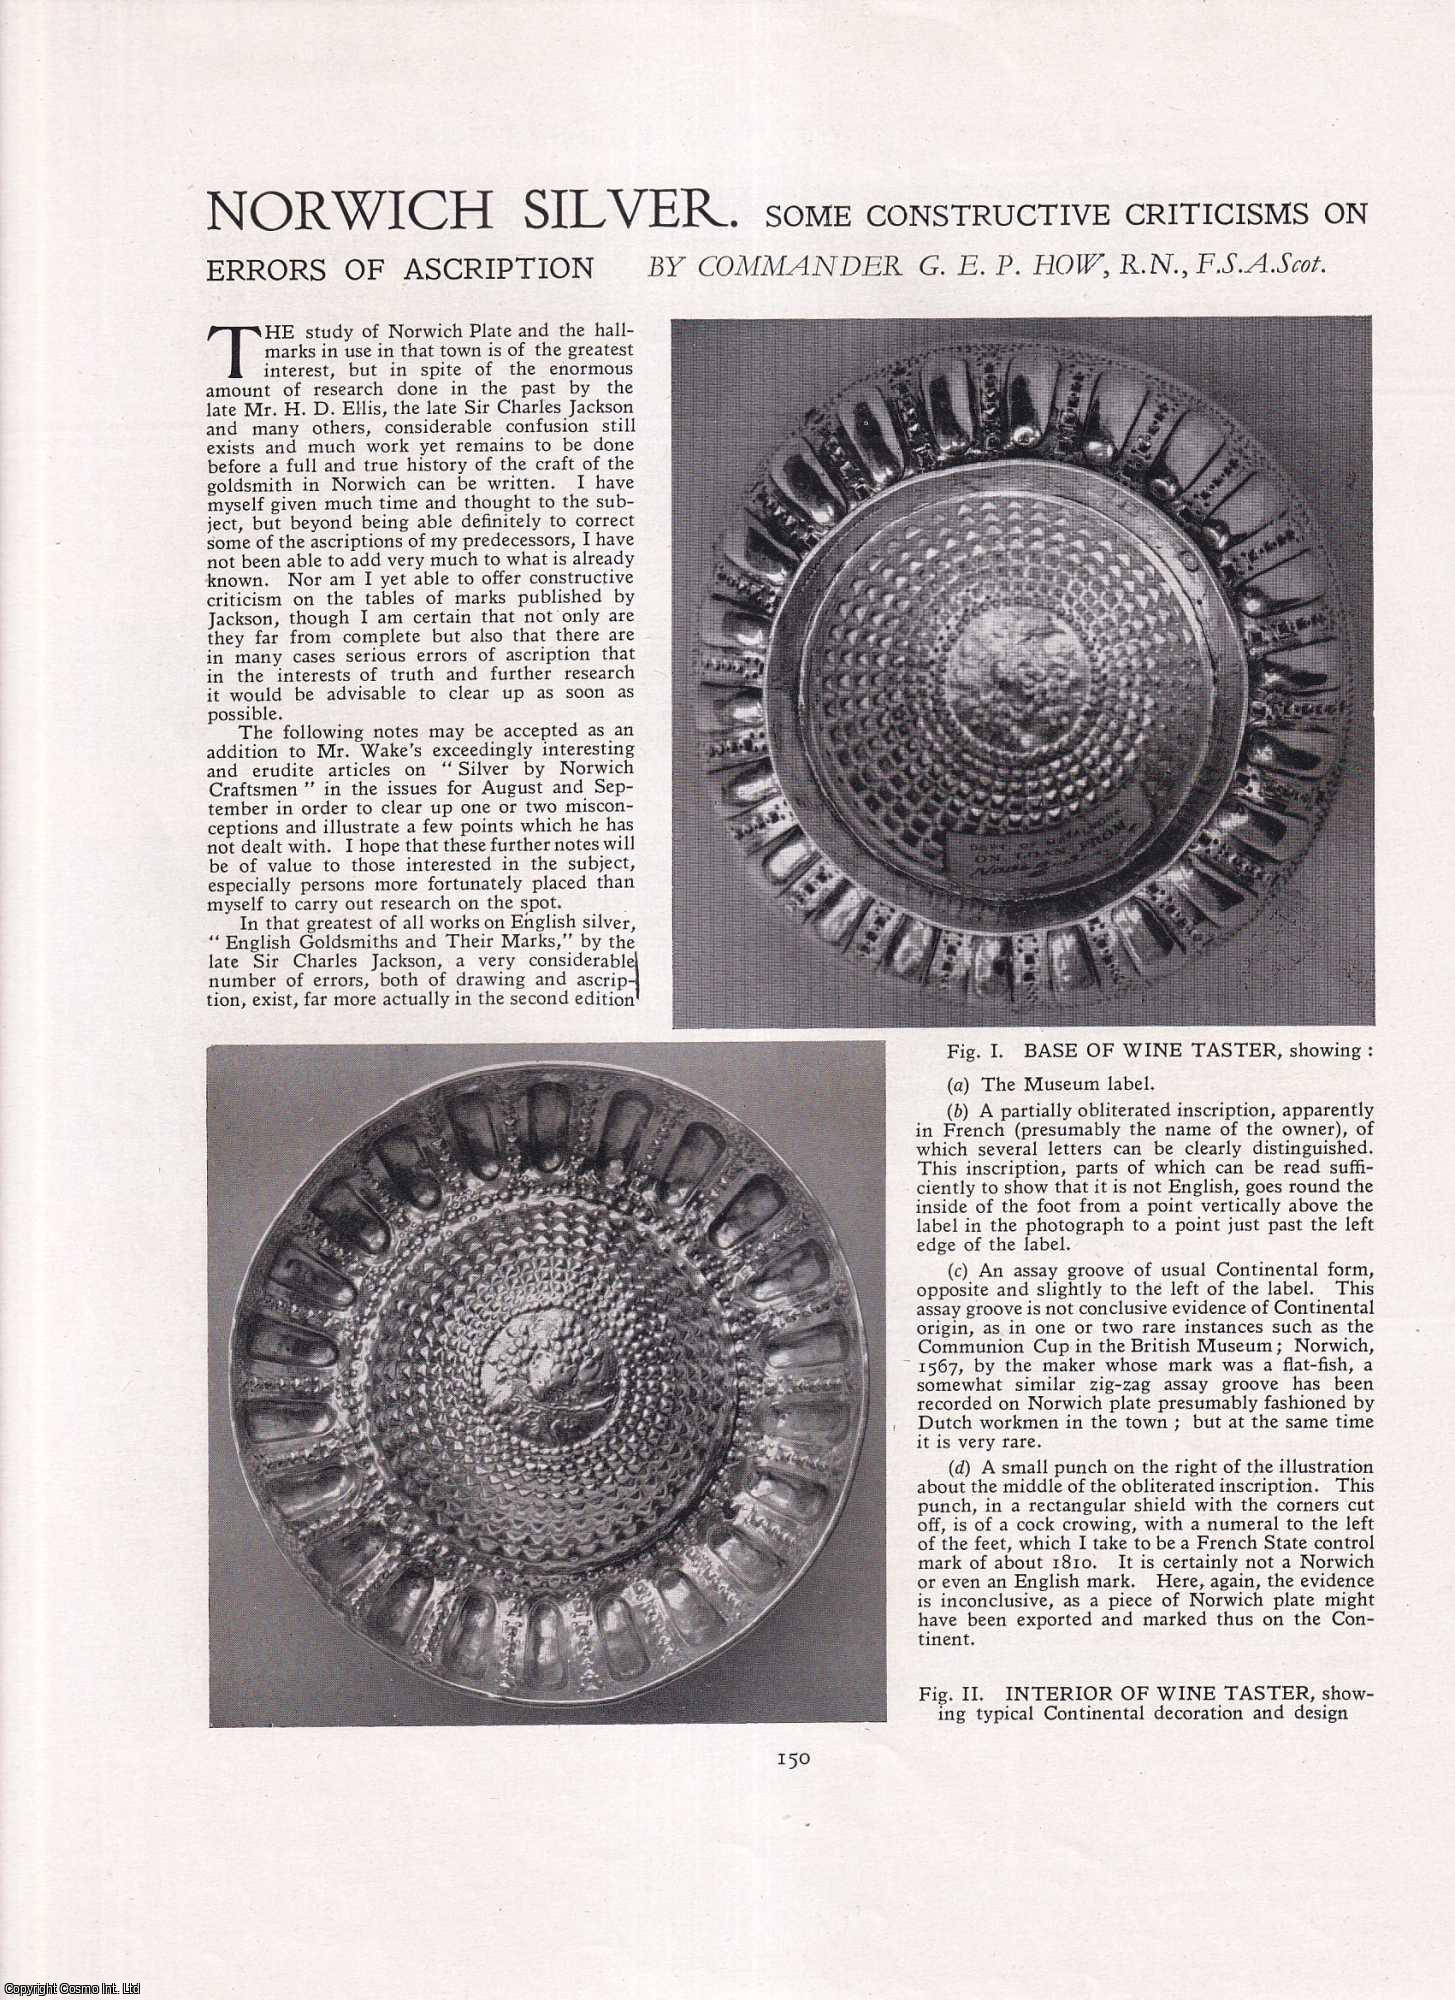 Commander G.E.P. How - Norwich Silver: Some Constructive Criticisms on Errors of Ascription. An original article from Apollo, International Magazine of the Arts, 1944.